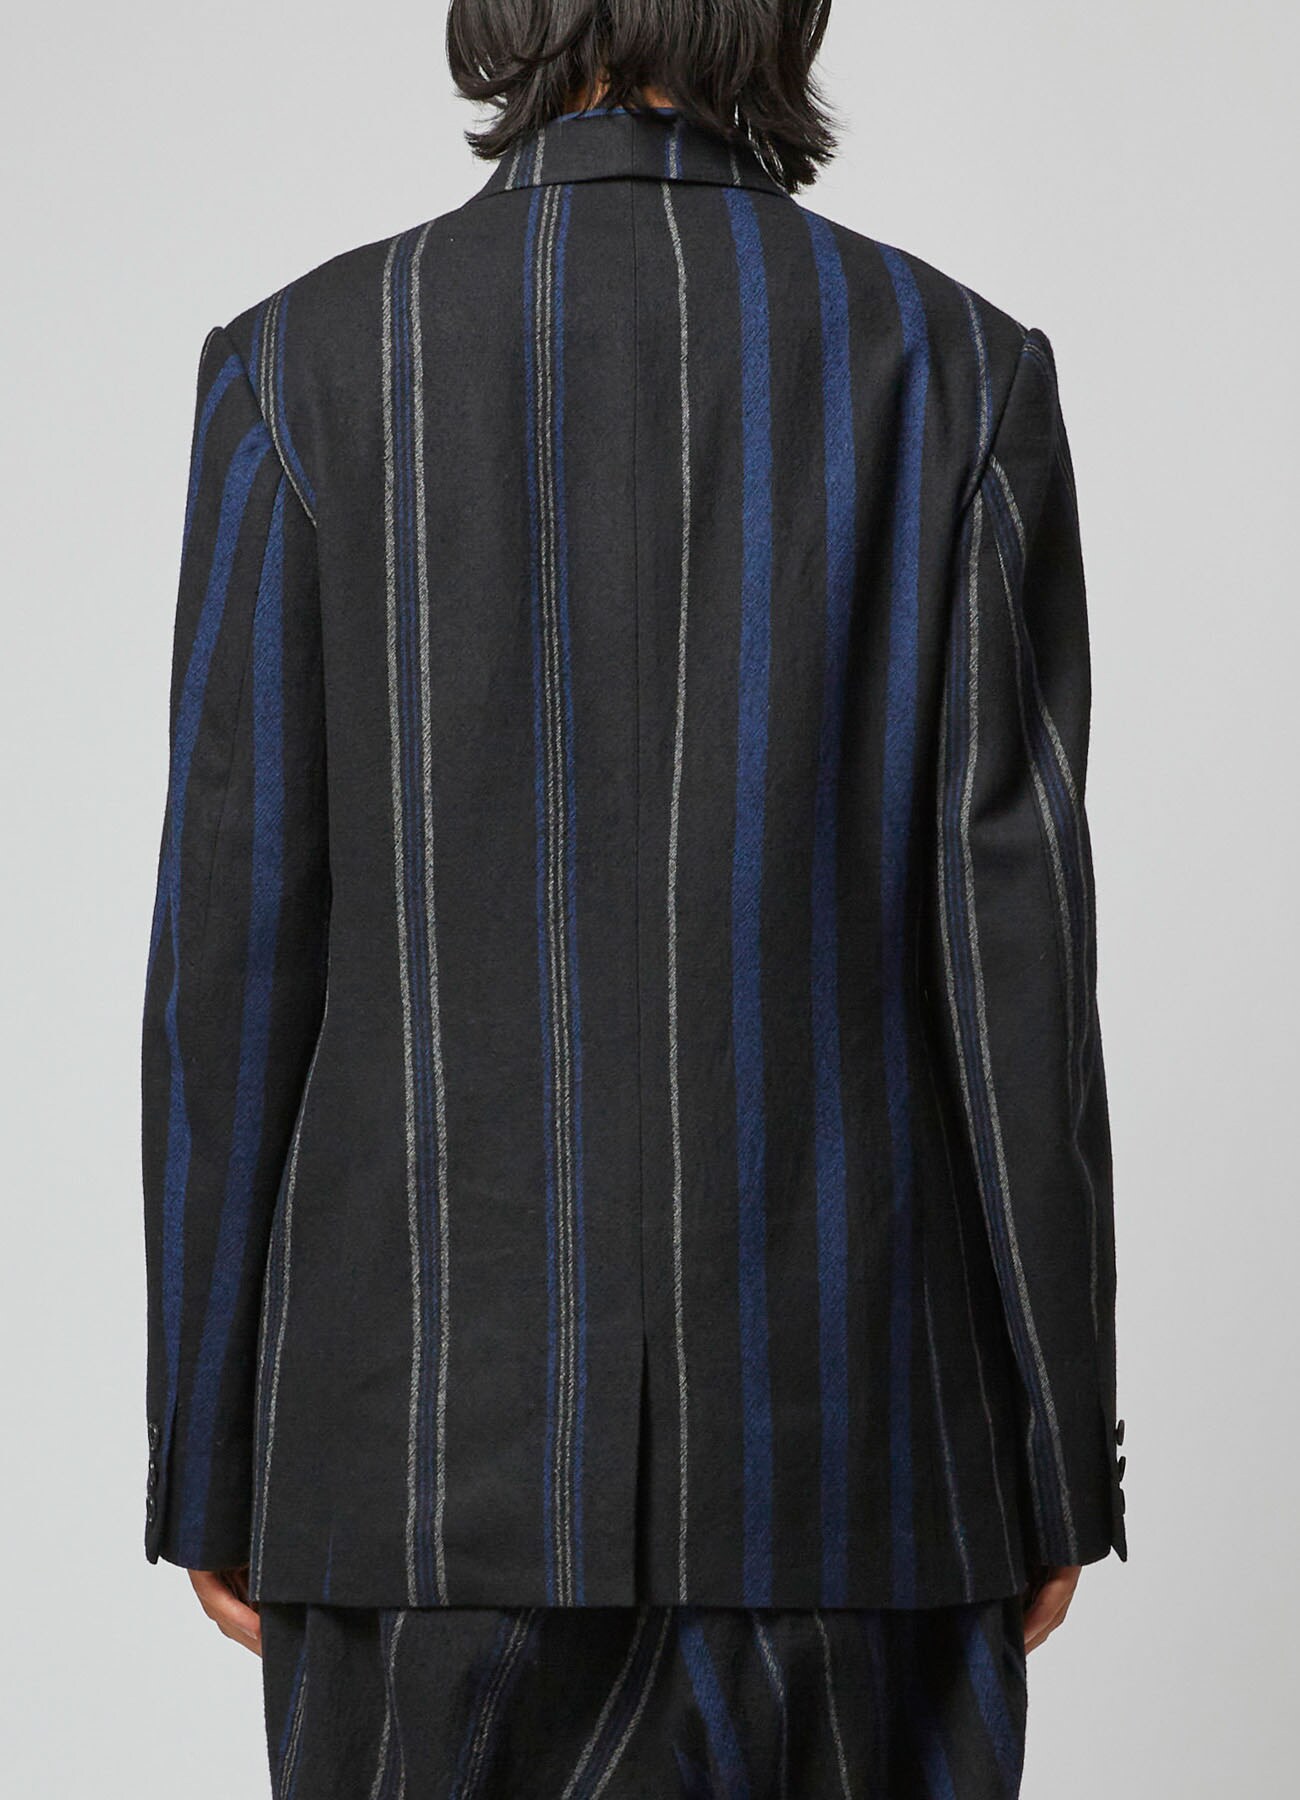 STRIPED PATTERN JACKET WITH COLOR SCHEME